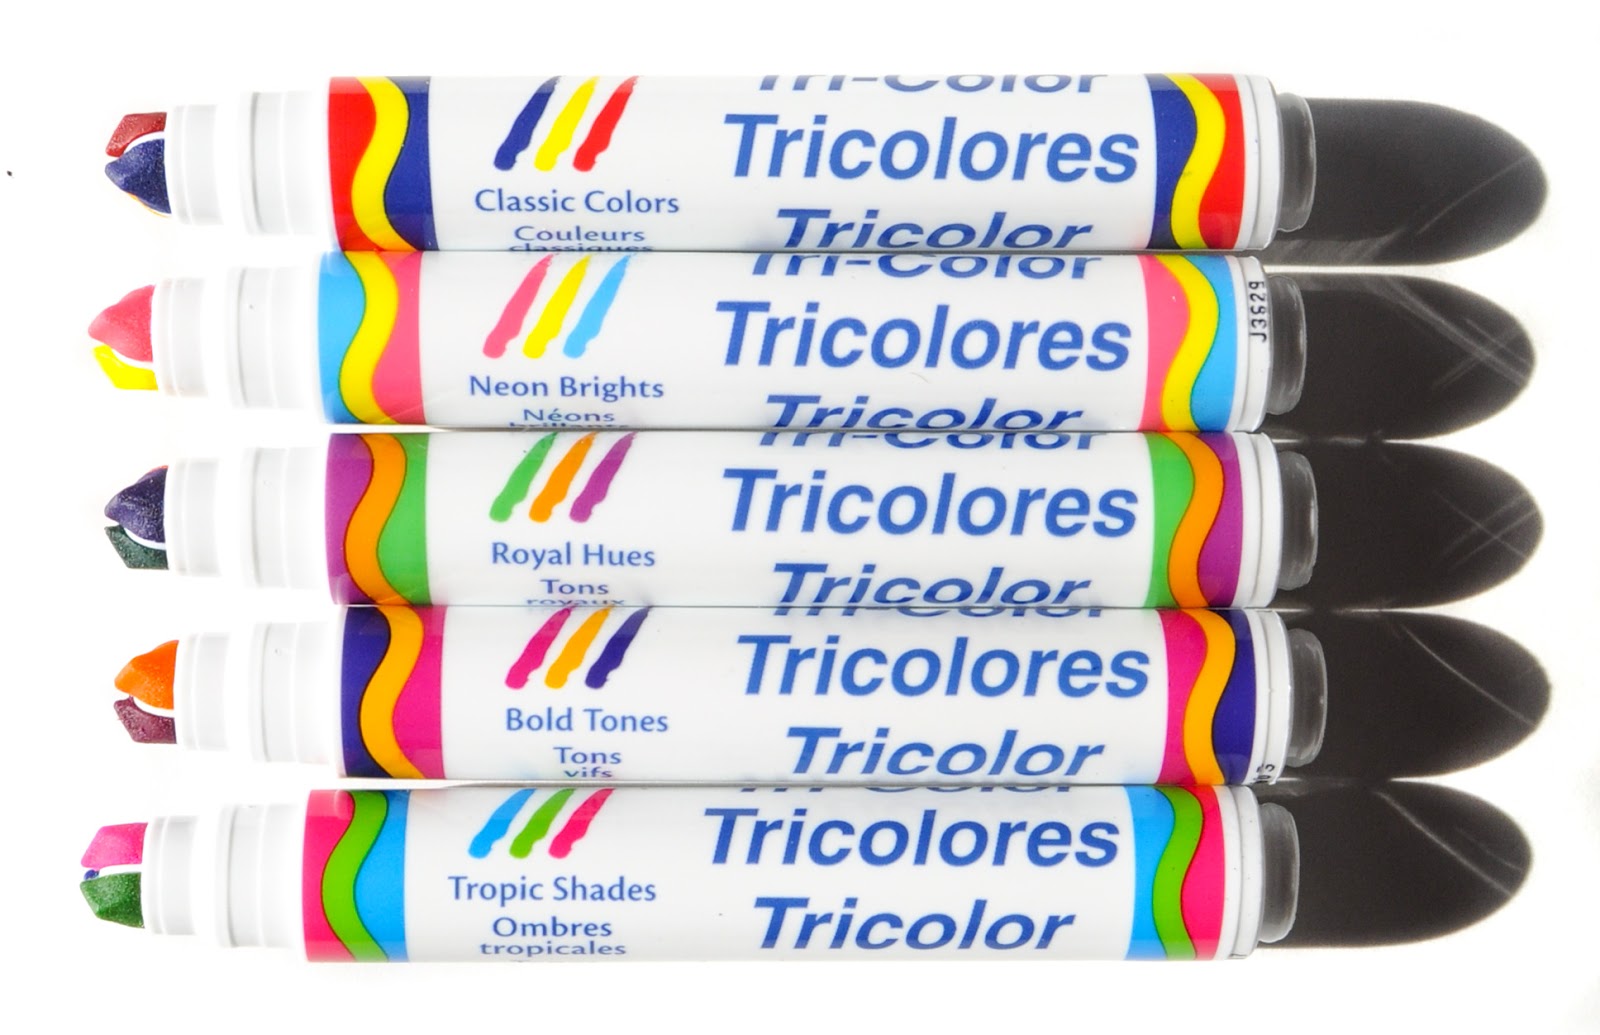 Crayola Tri-Color Markers: What's In the Box